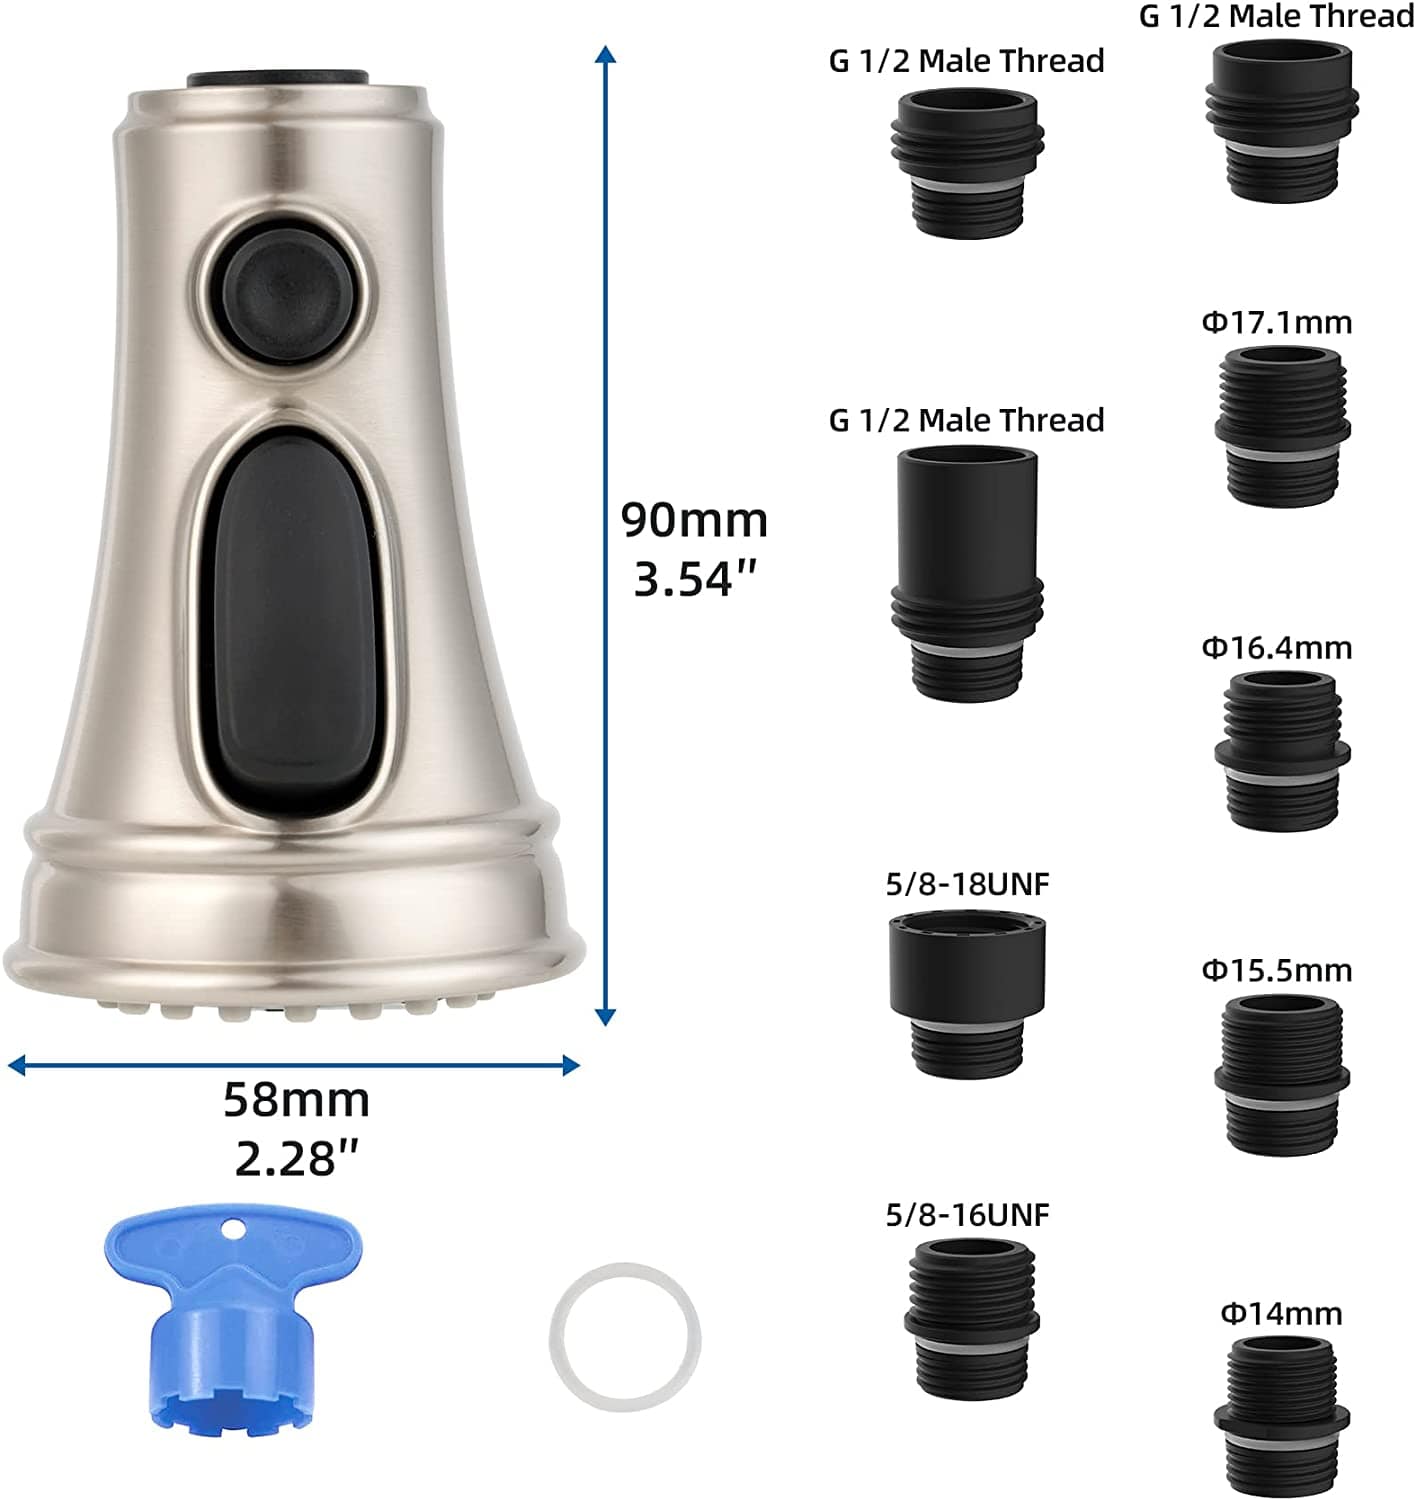 Hibbent 龙头配件 Hibbent Kitchen Faucet Head Replacement Pull Down Faucet Spray Head, 3 Function Faucet Sprayer Nozzle with 9 Adapters Compatible with Moen, American Standard, Delta, Kohler Faucets